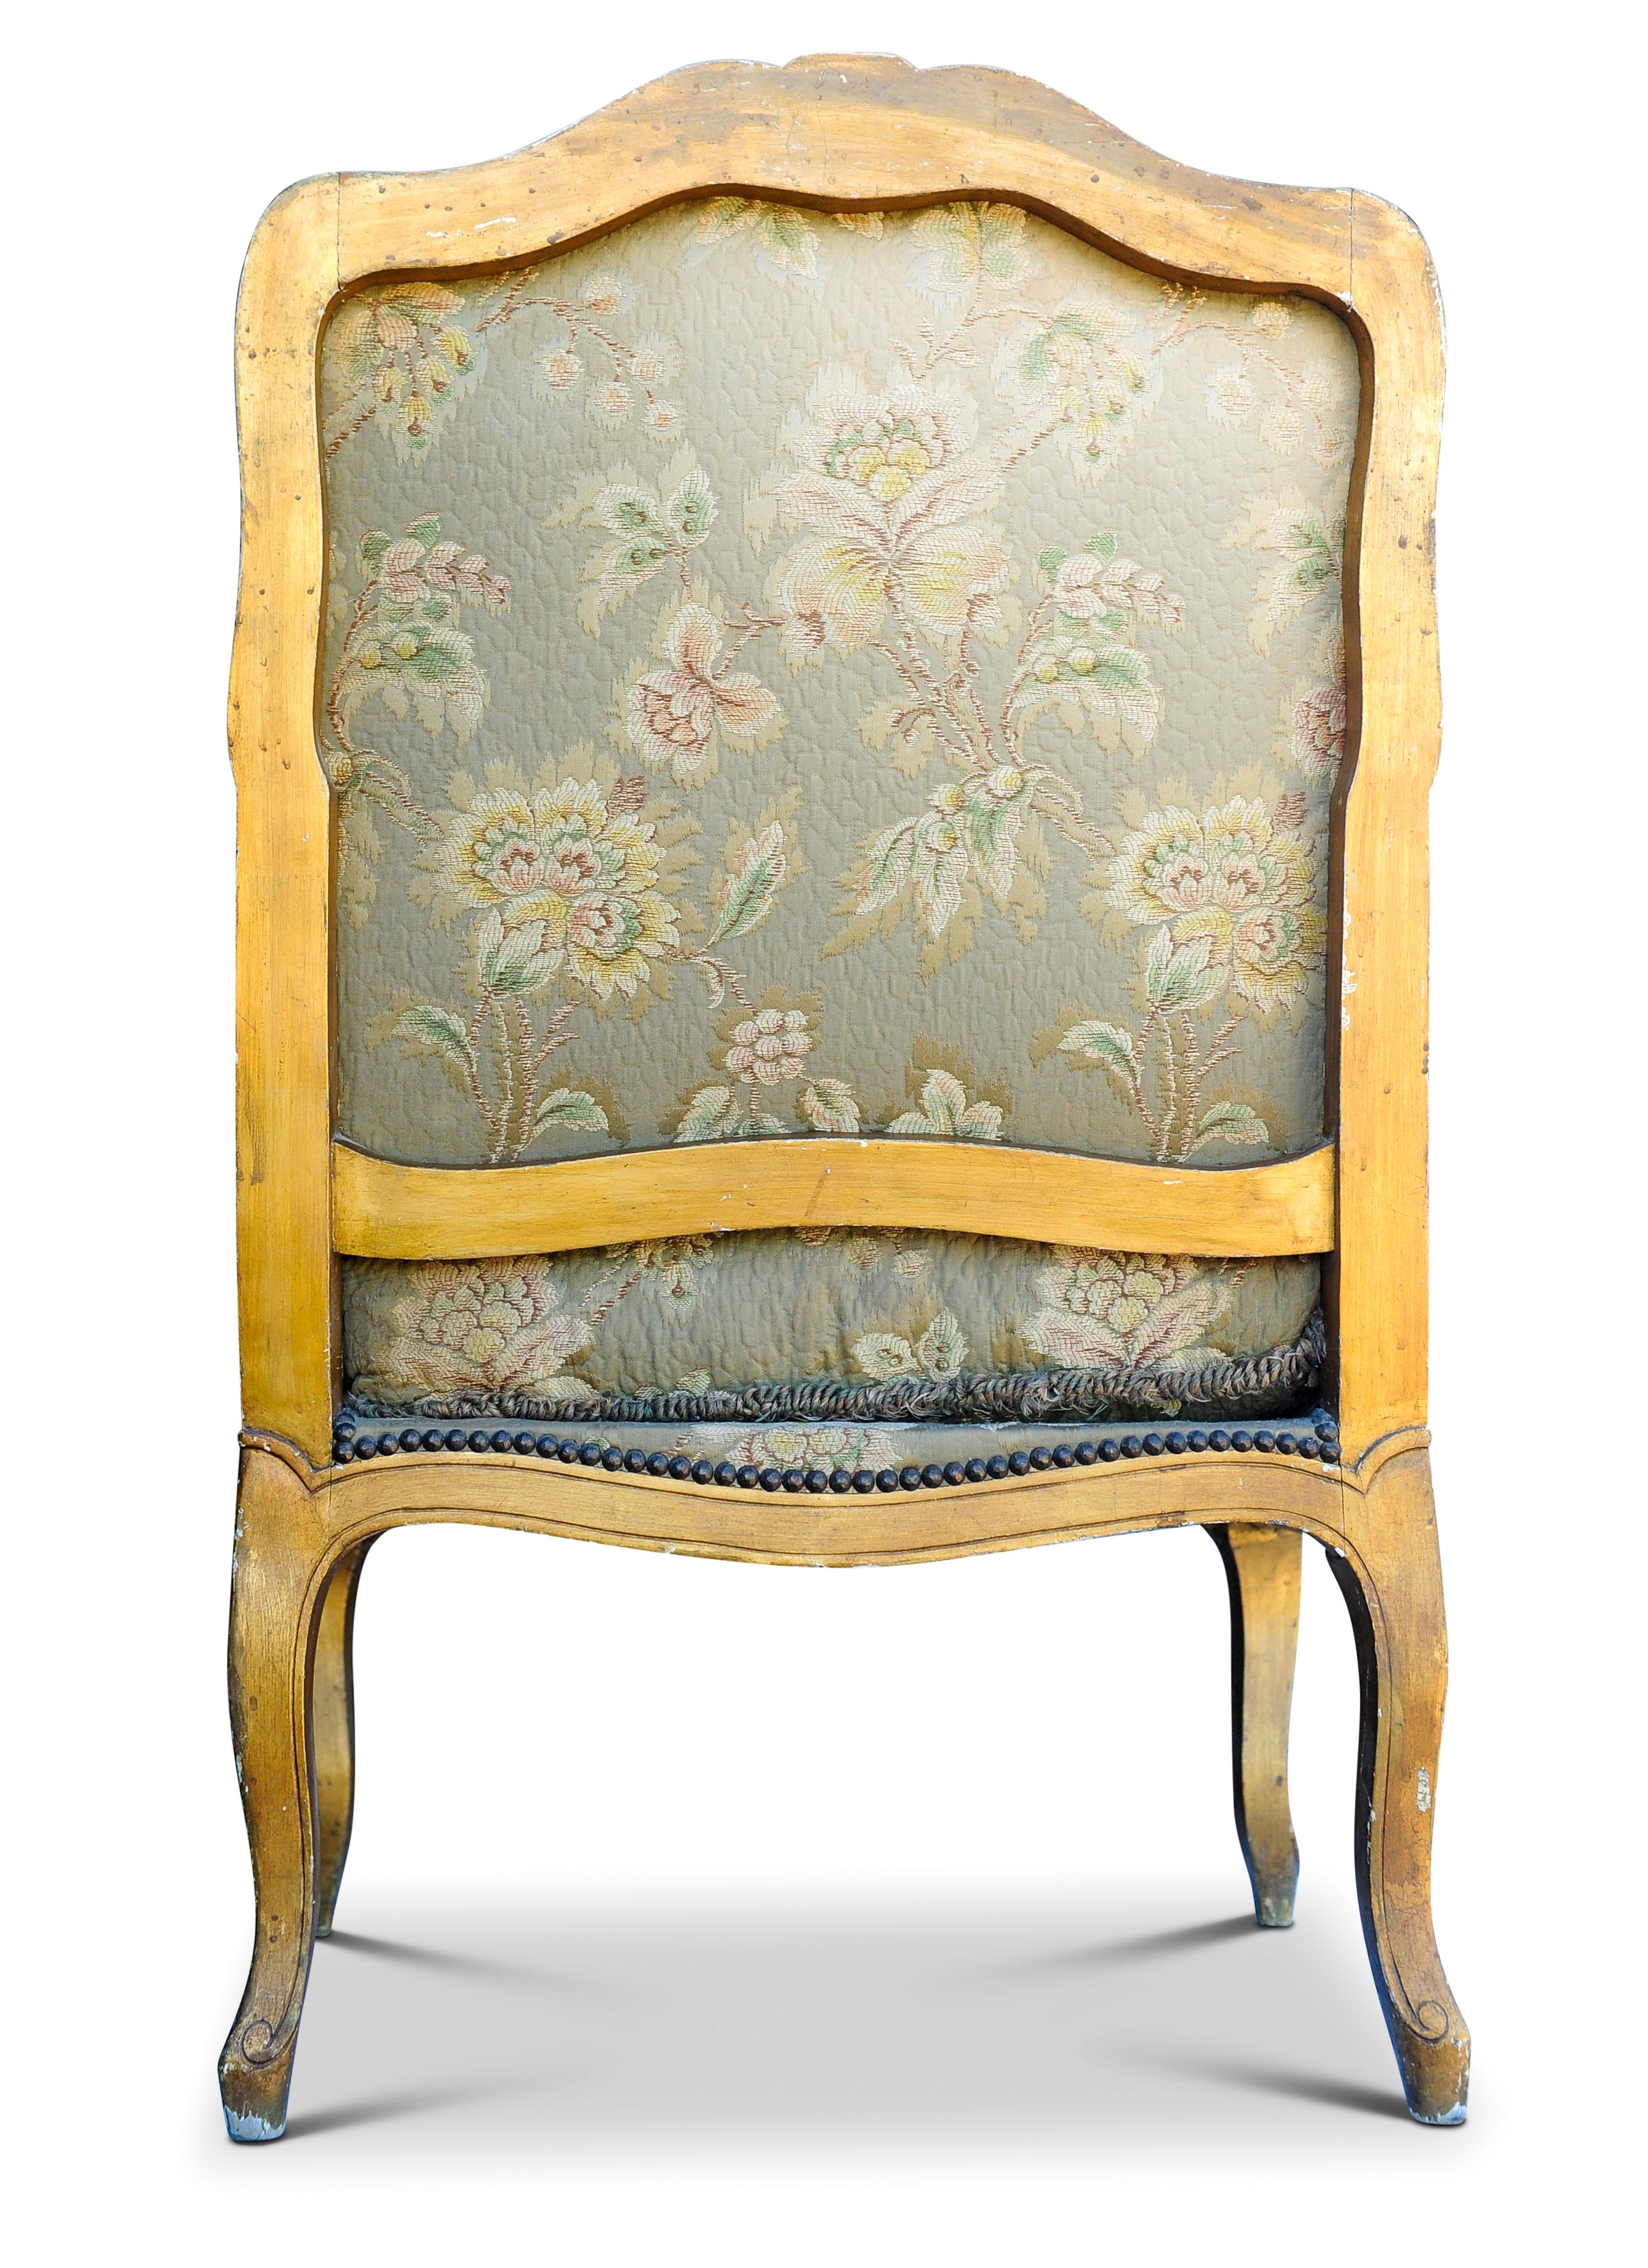 Antique 19th Century French Gilded Bergere Armchair with Stud Detailing For Sale 1